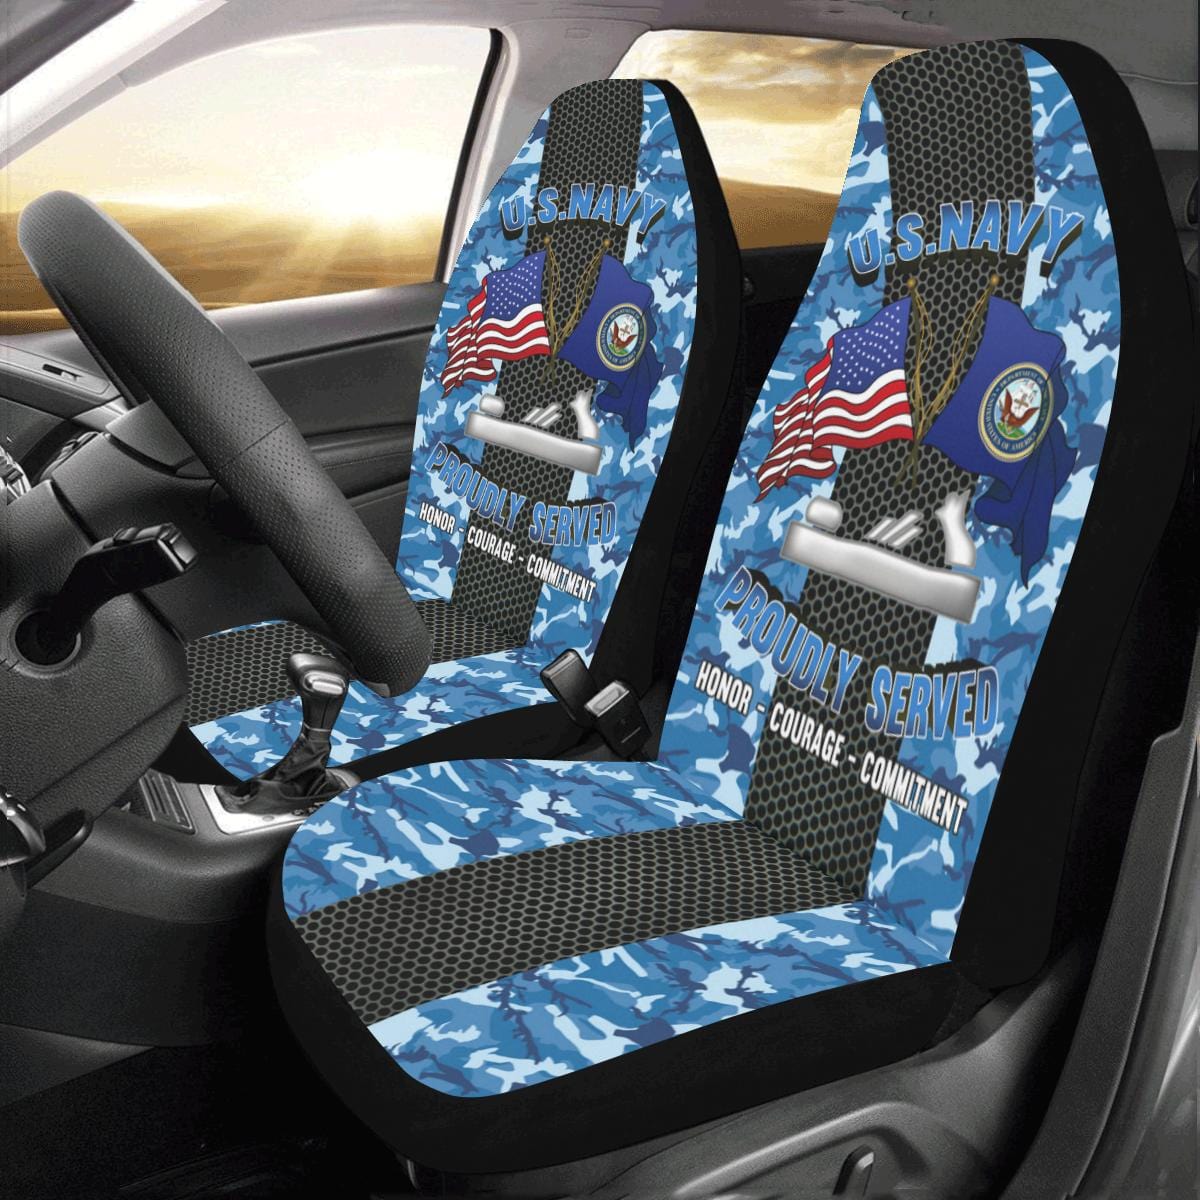 Navy Patternmaker Navy PM Car Seat Covers (Set of 2)-SeatCovers-Navy-Rate-Veterans Nation